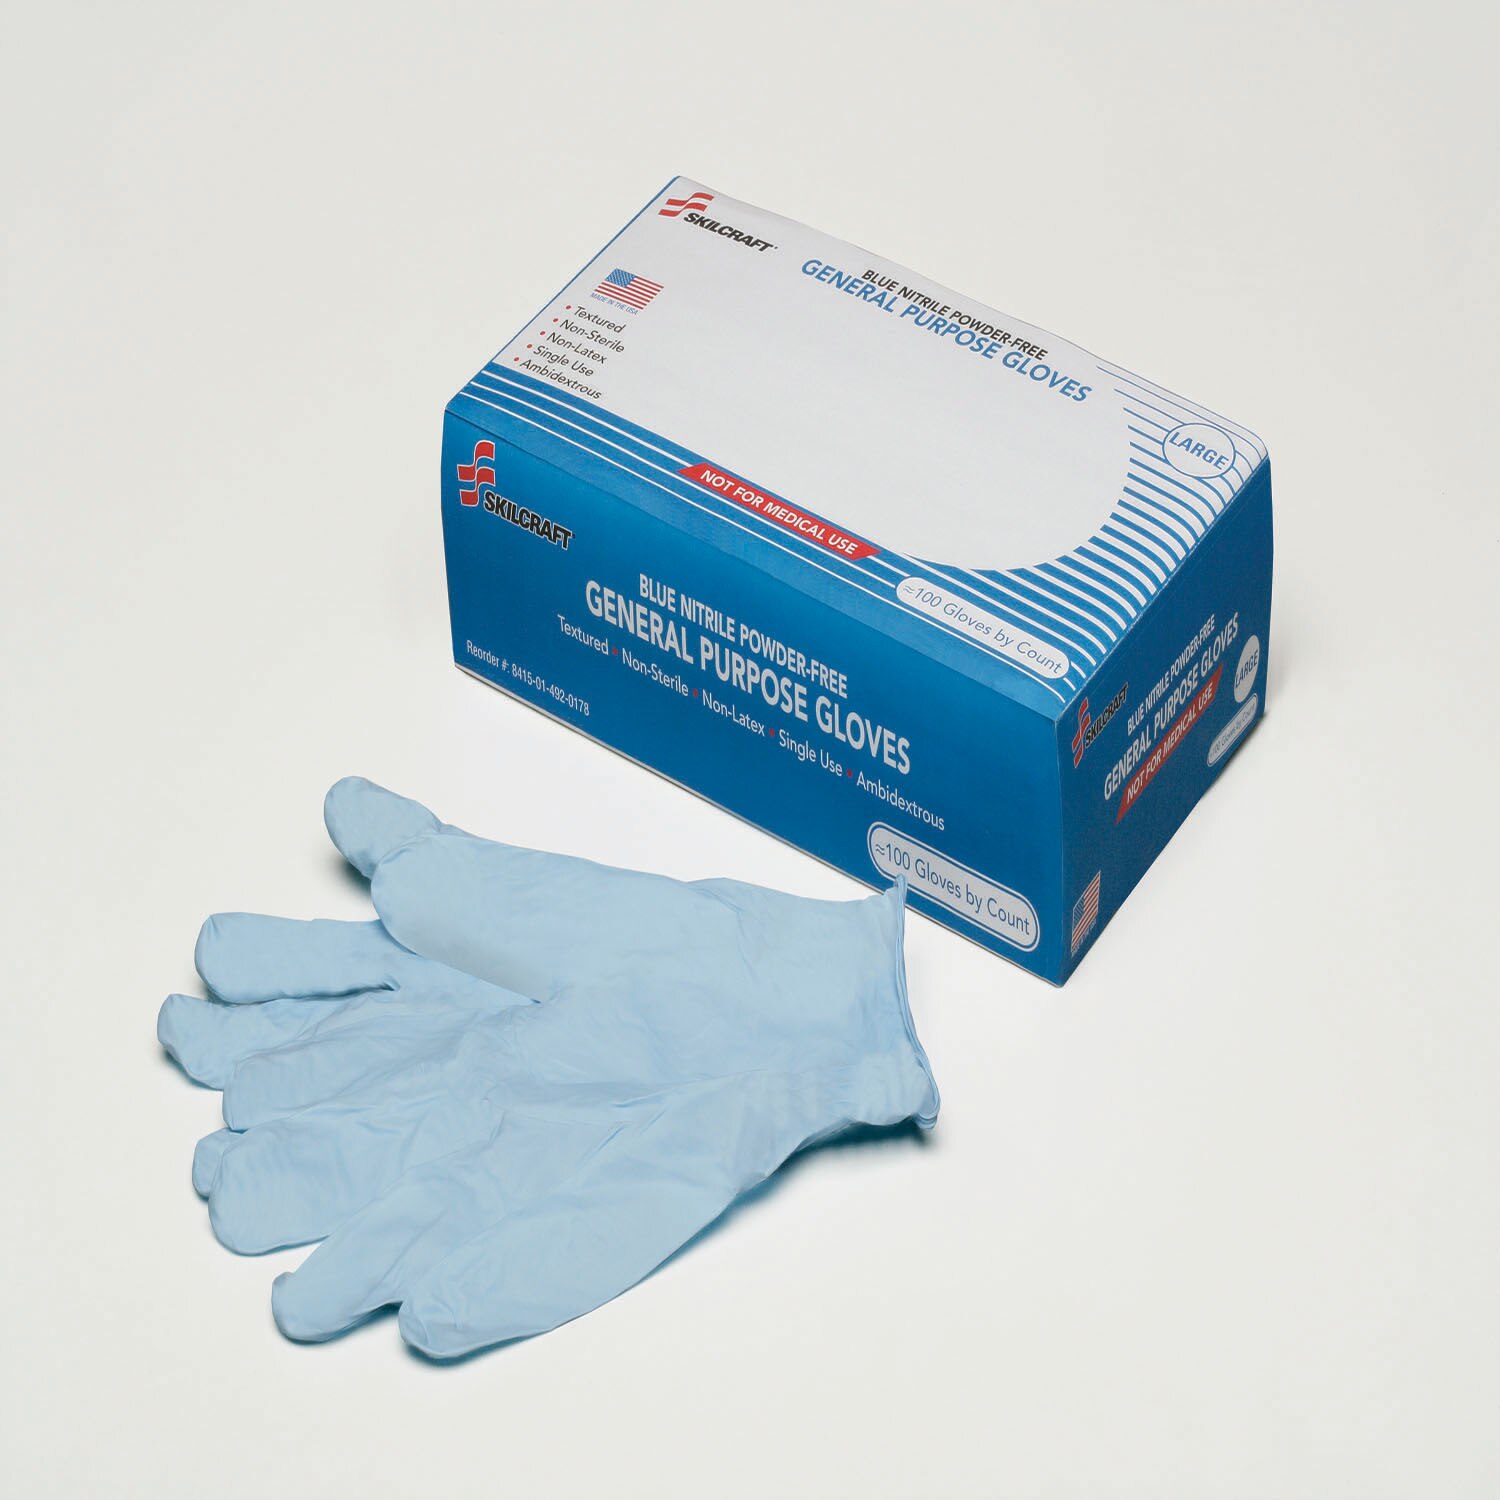 Gloves, Disposable, Powder-Free, Latex-Free, Nitrile, Industrial-Grade, Large